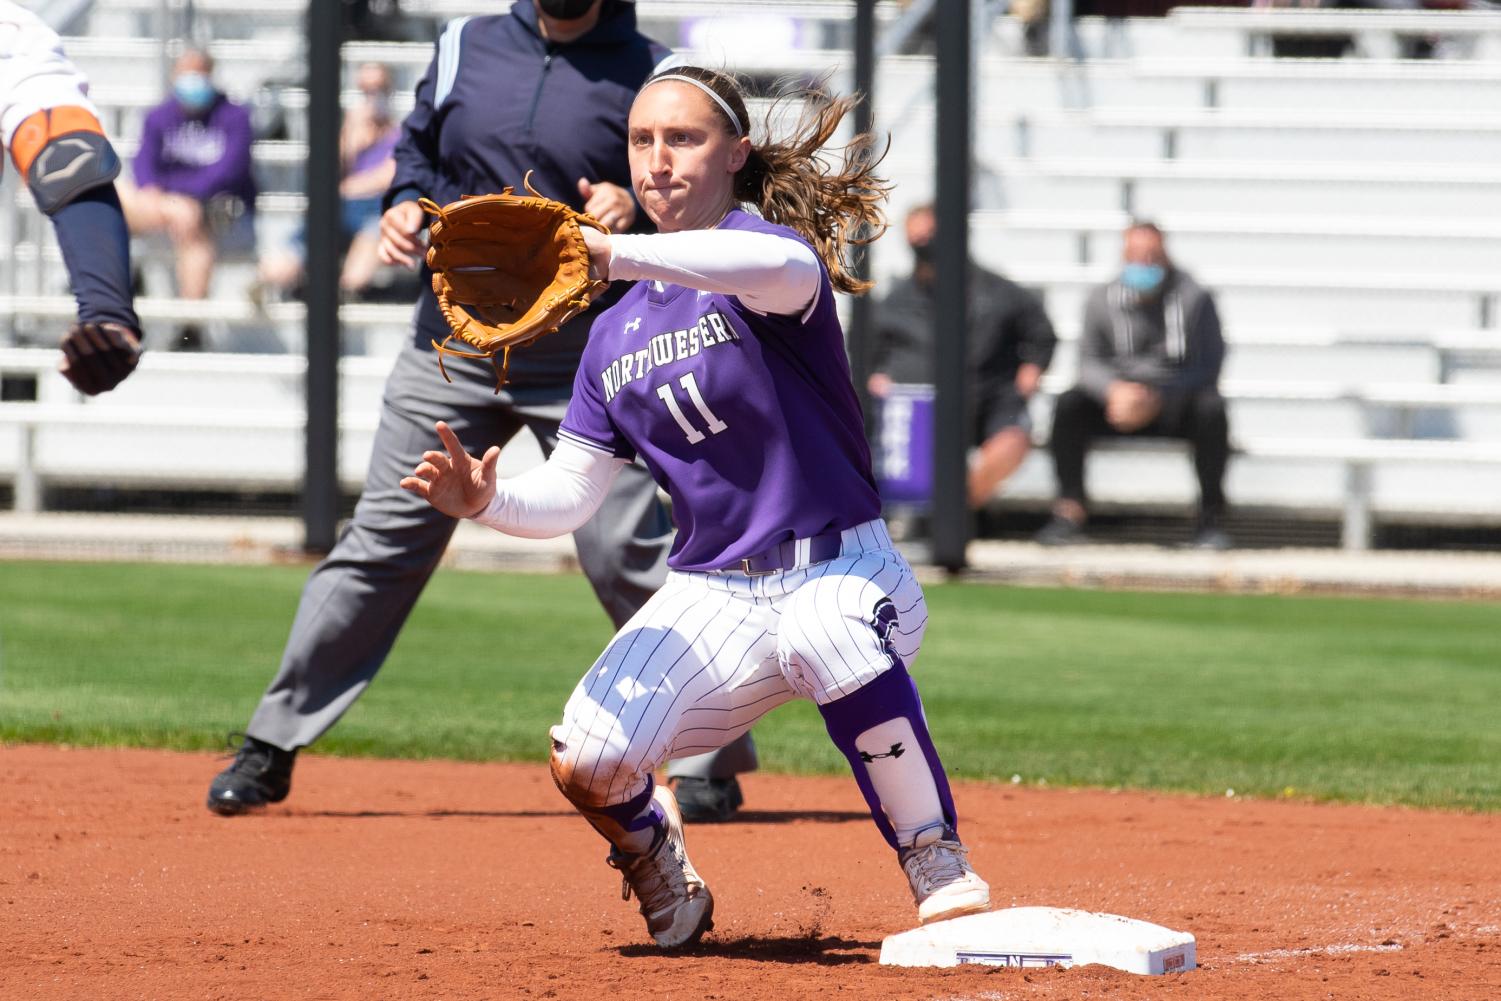 Softball+player+wearing+purple+uniform+holds+out+glove+on+field.